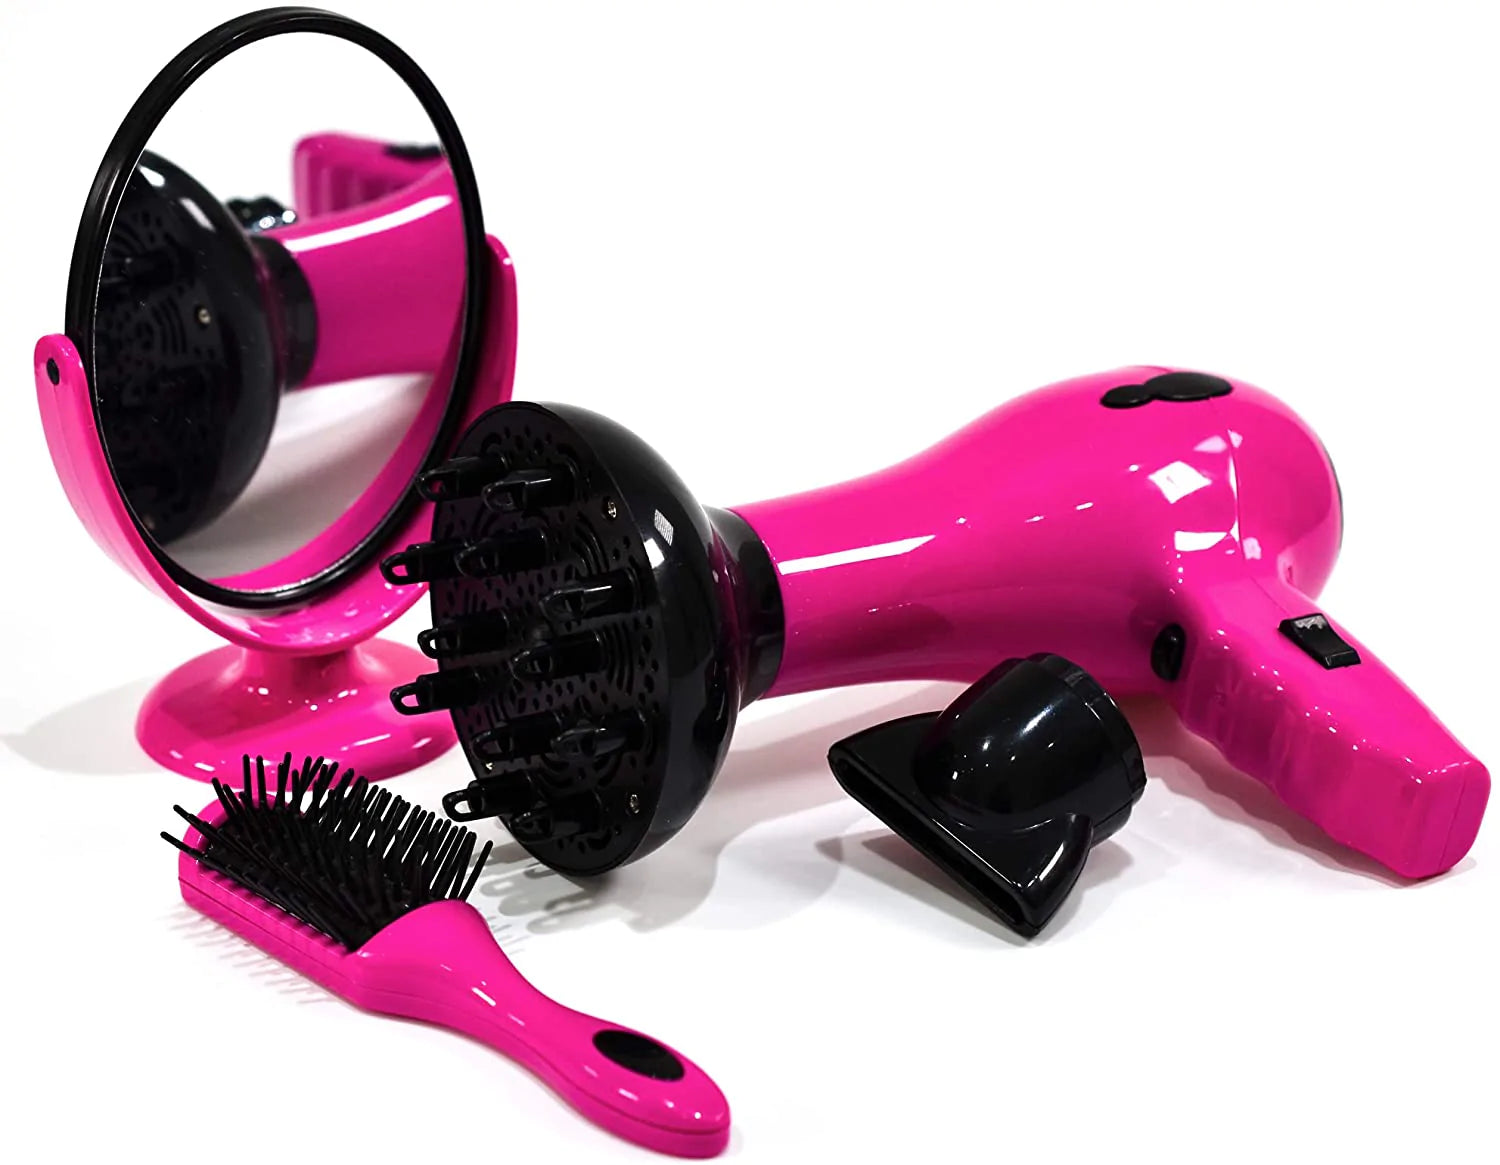 Battery Operated Hairdryer Set In Carry Case